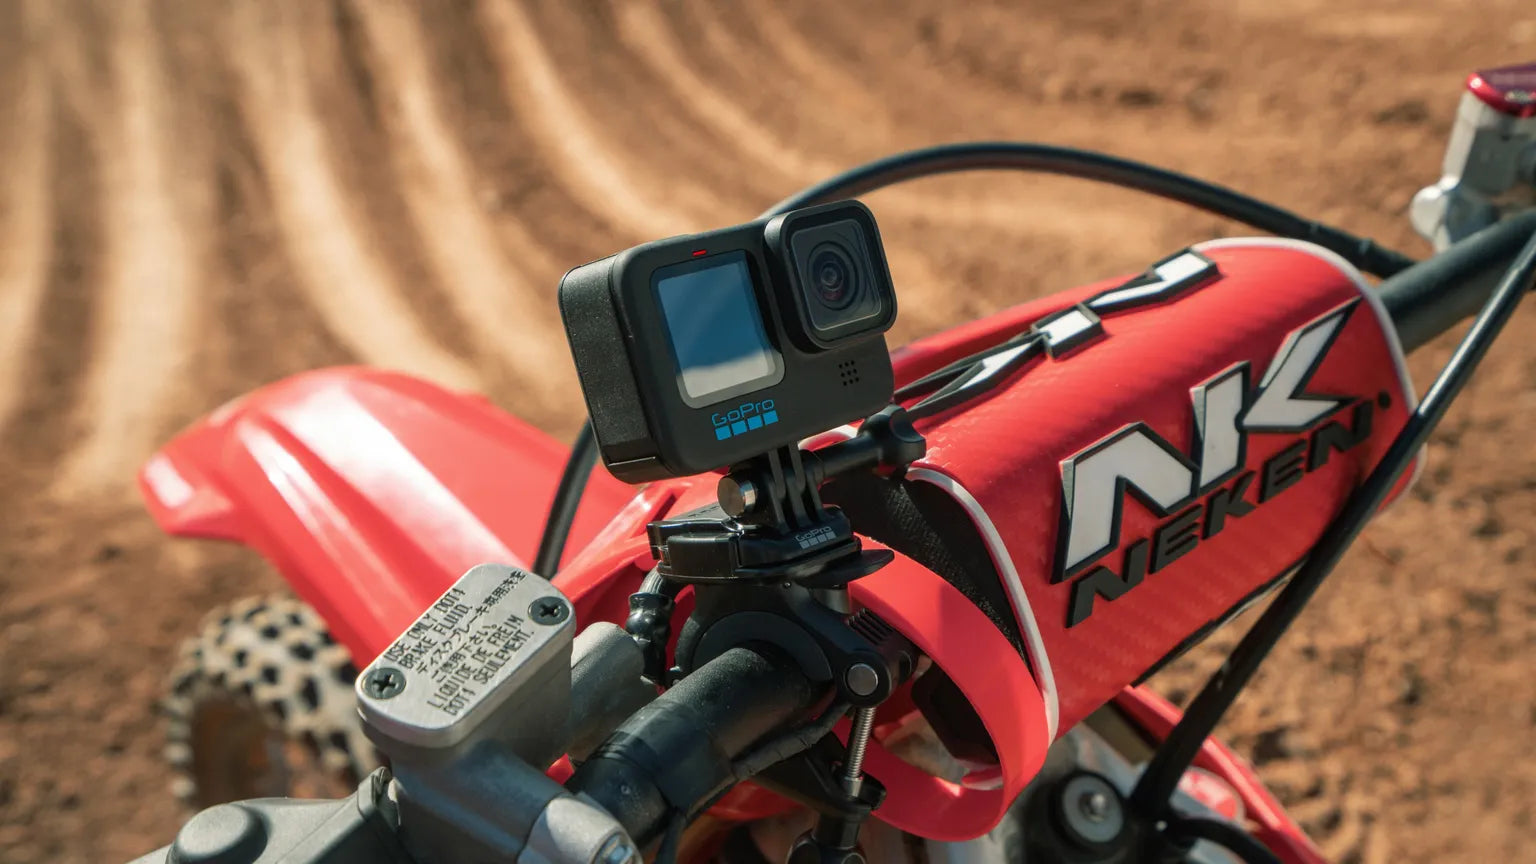 Photo of the GoPro mounted to a Honda CRF motocross bike